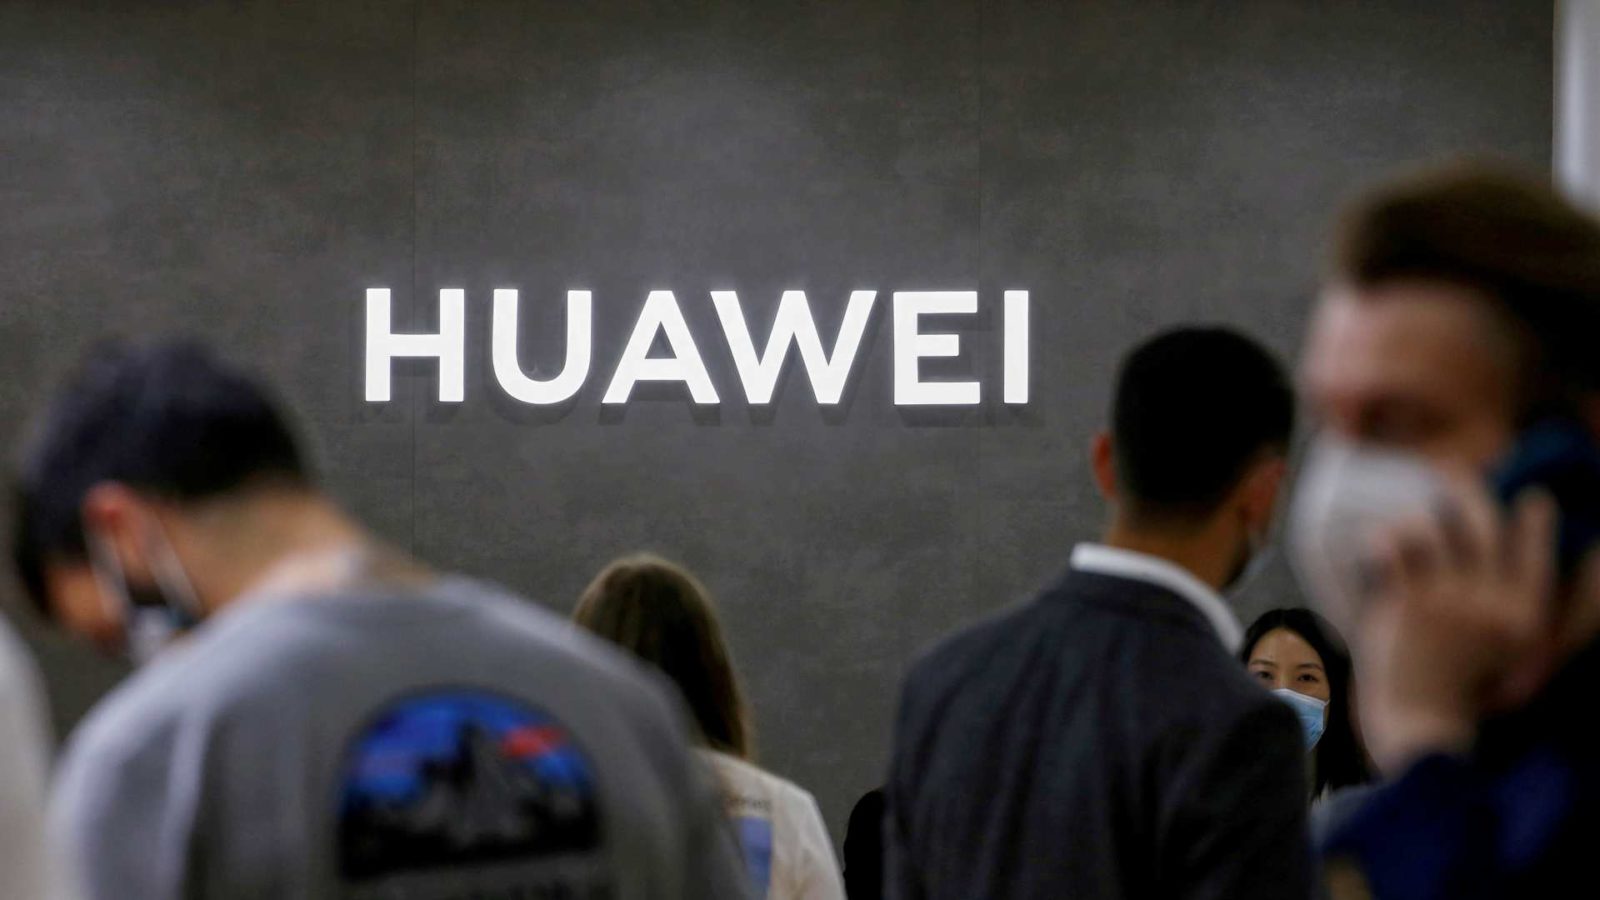 Huawei gets green signal to deploy 5G in Italy with certain limitations